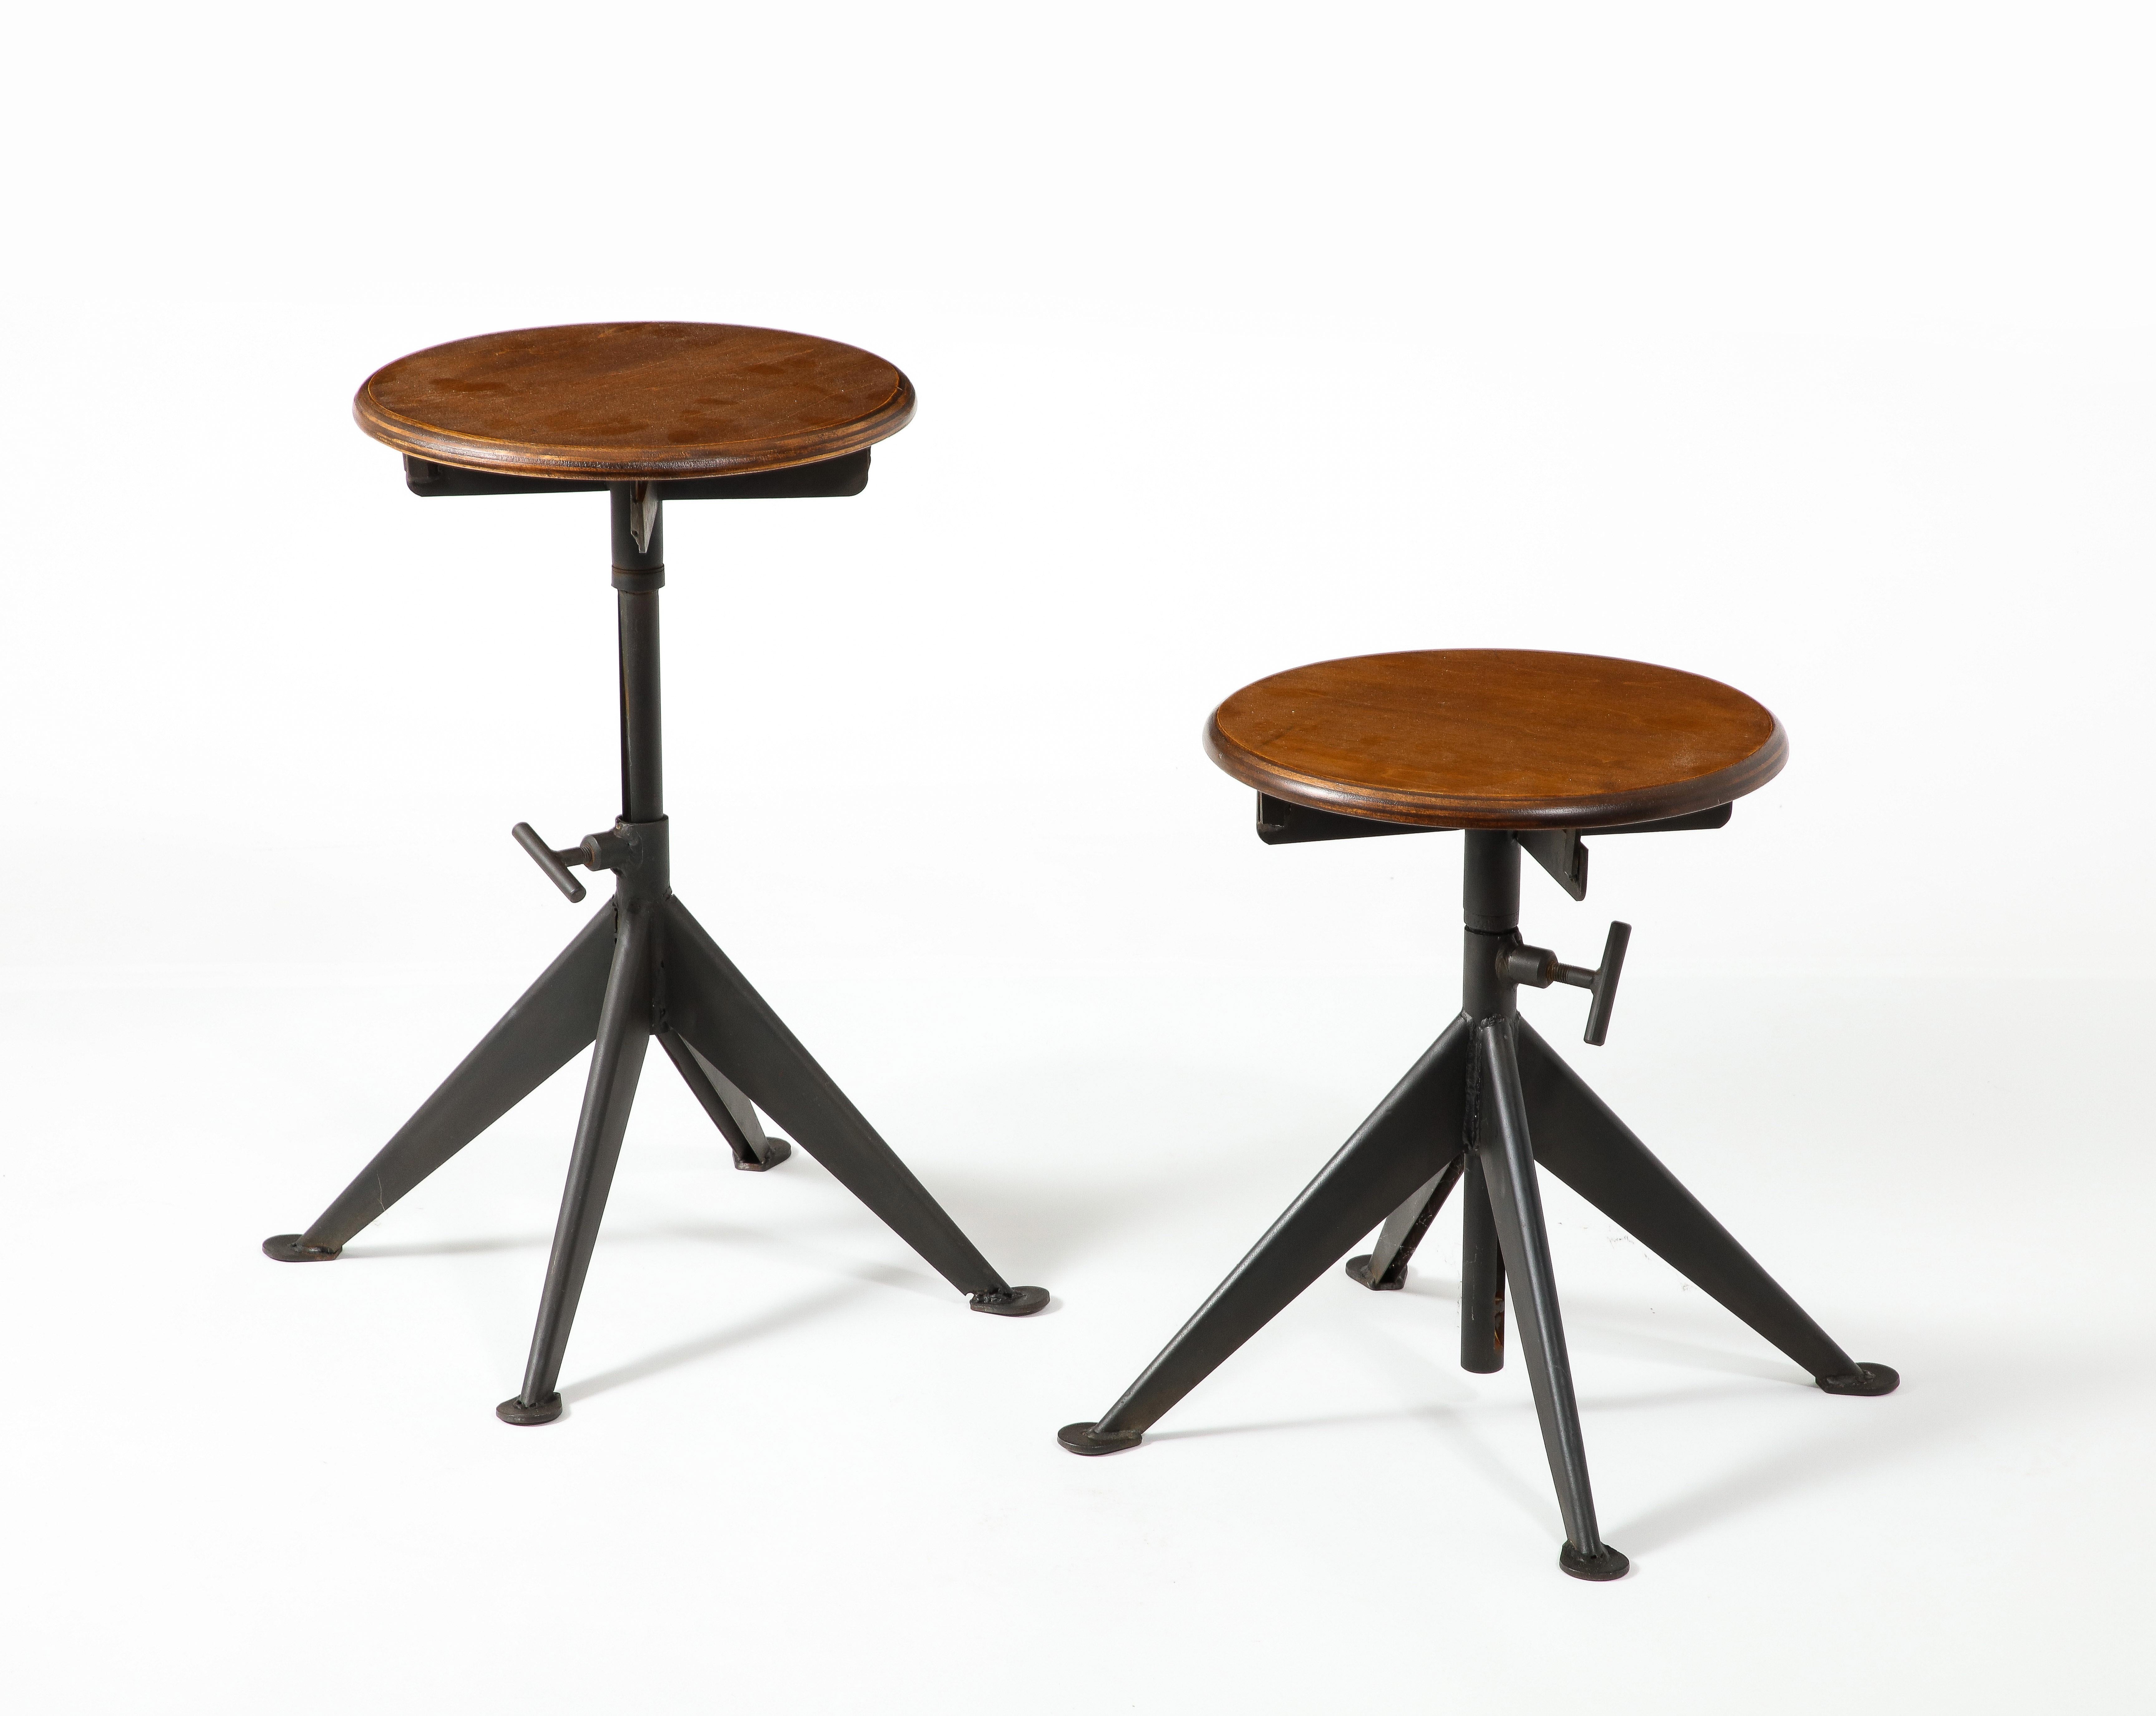 Pair of Industrial Steel & Ply Swedish Stools, Sweden 1950's For Sale 5